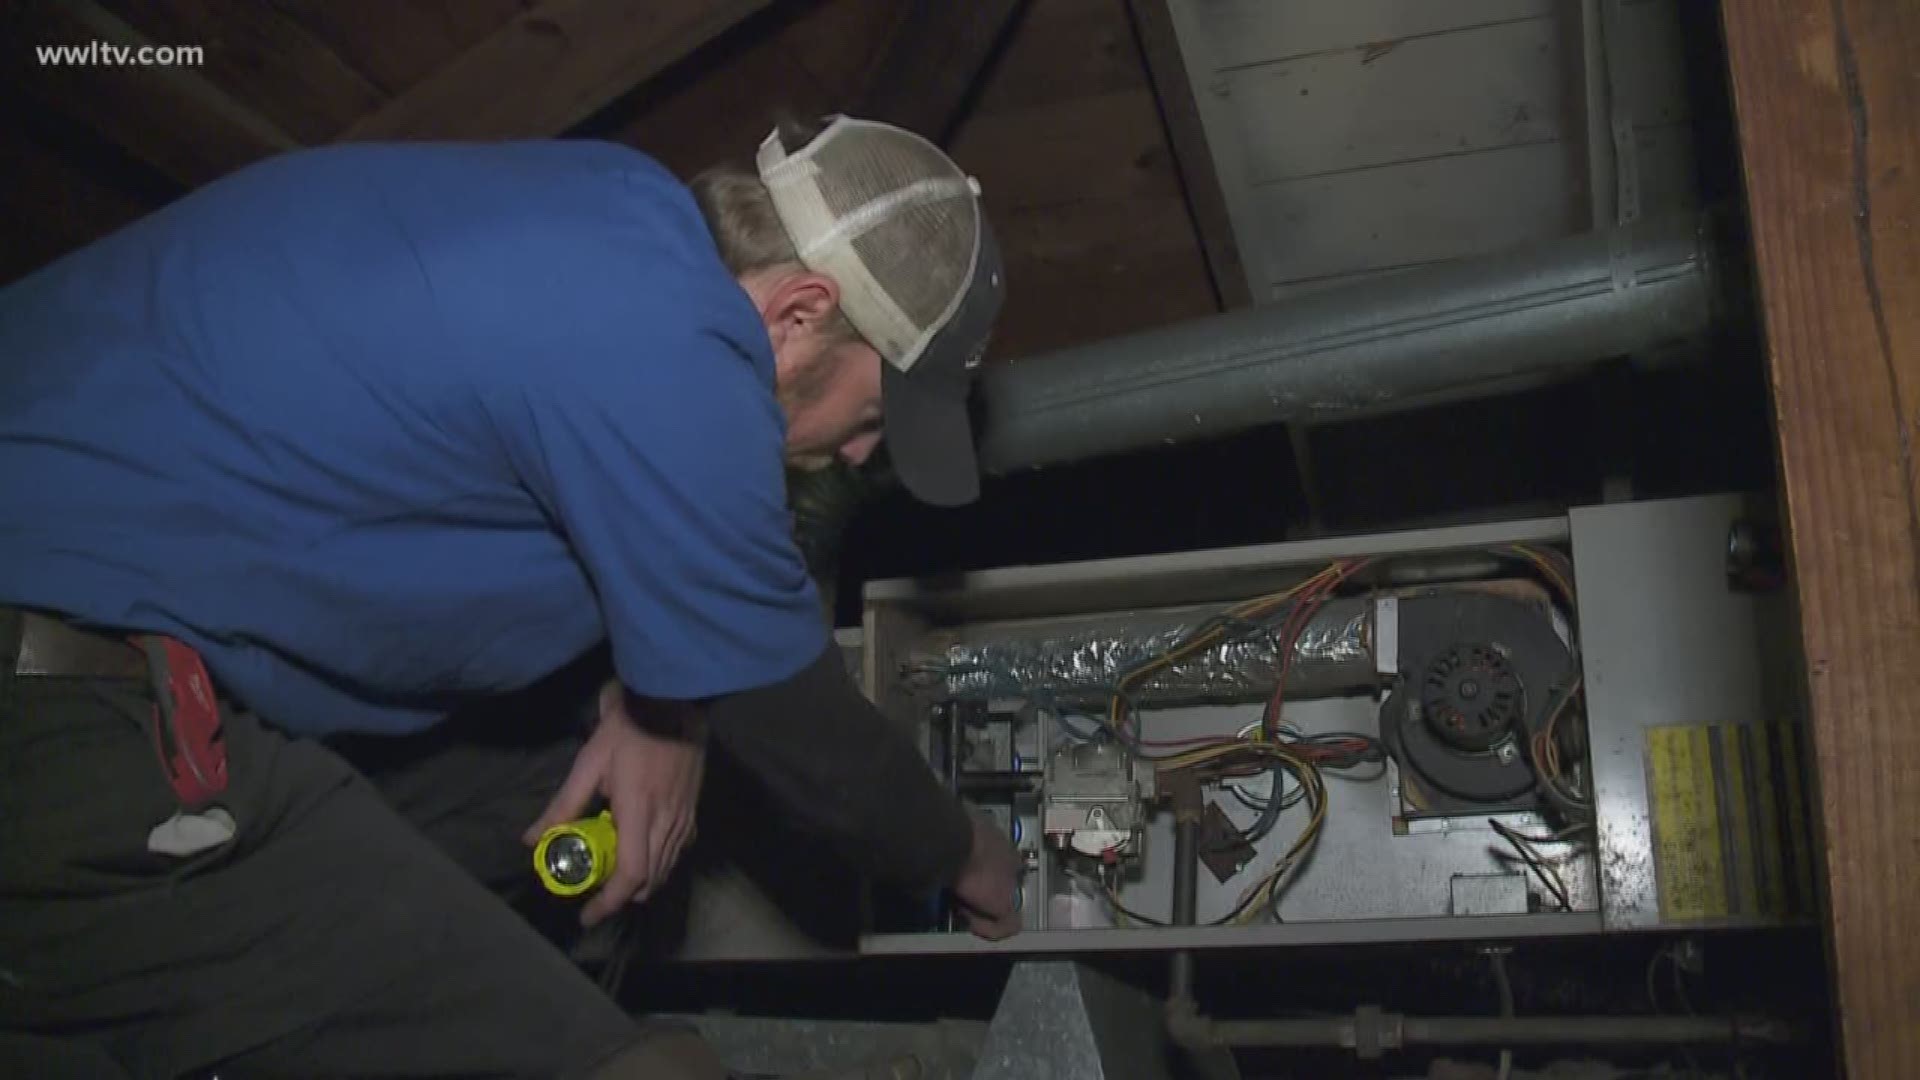 According to heater and air conditioning experts, many residents have called for service to check their furnaces before turning on their heaters.